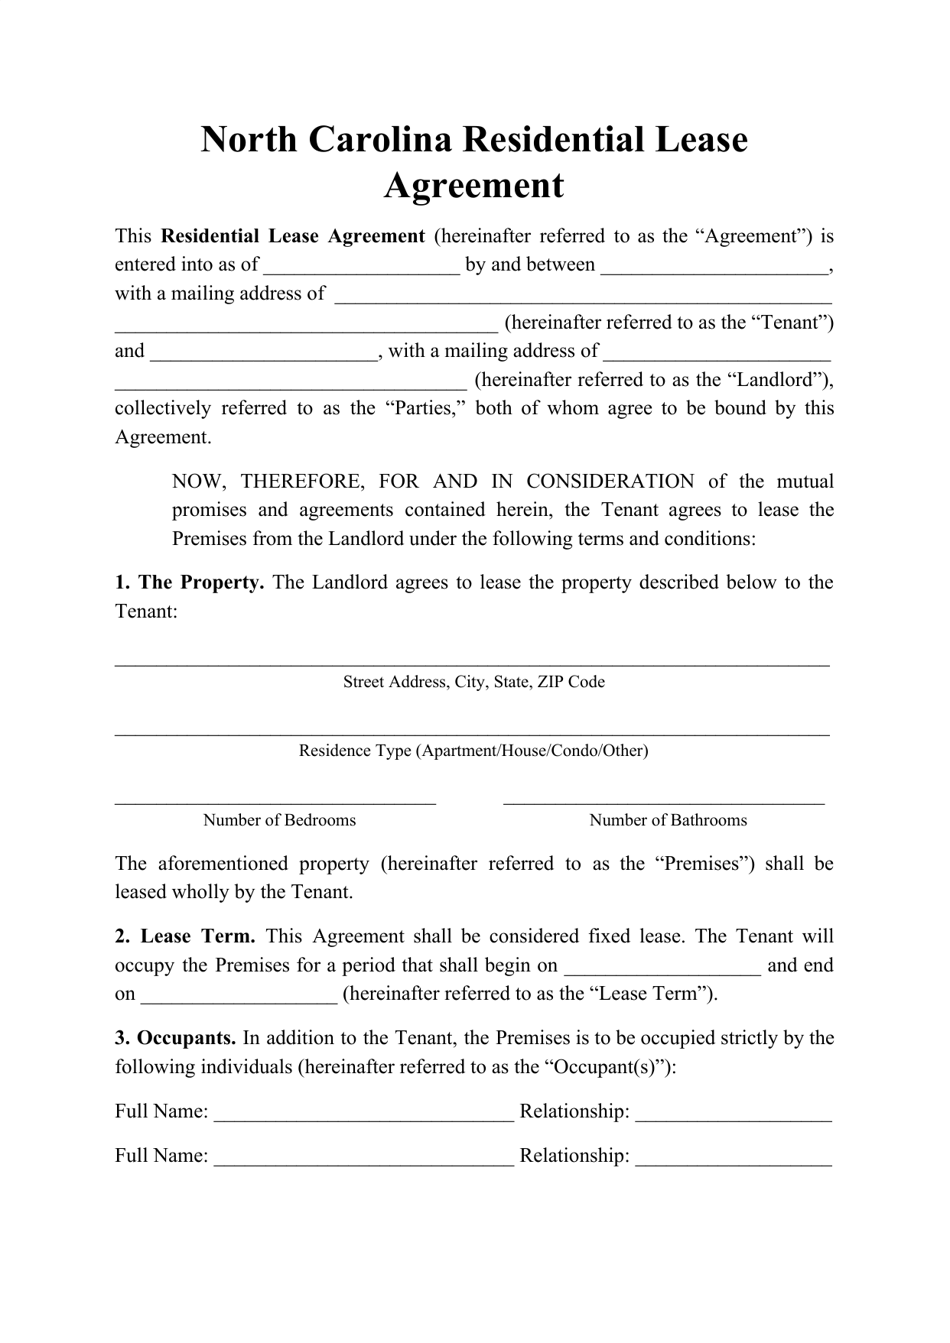 Residential Lease Agreement Template - North Carolina, Page 1